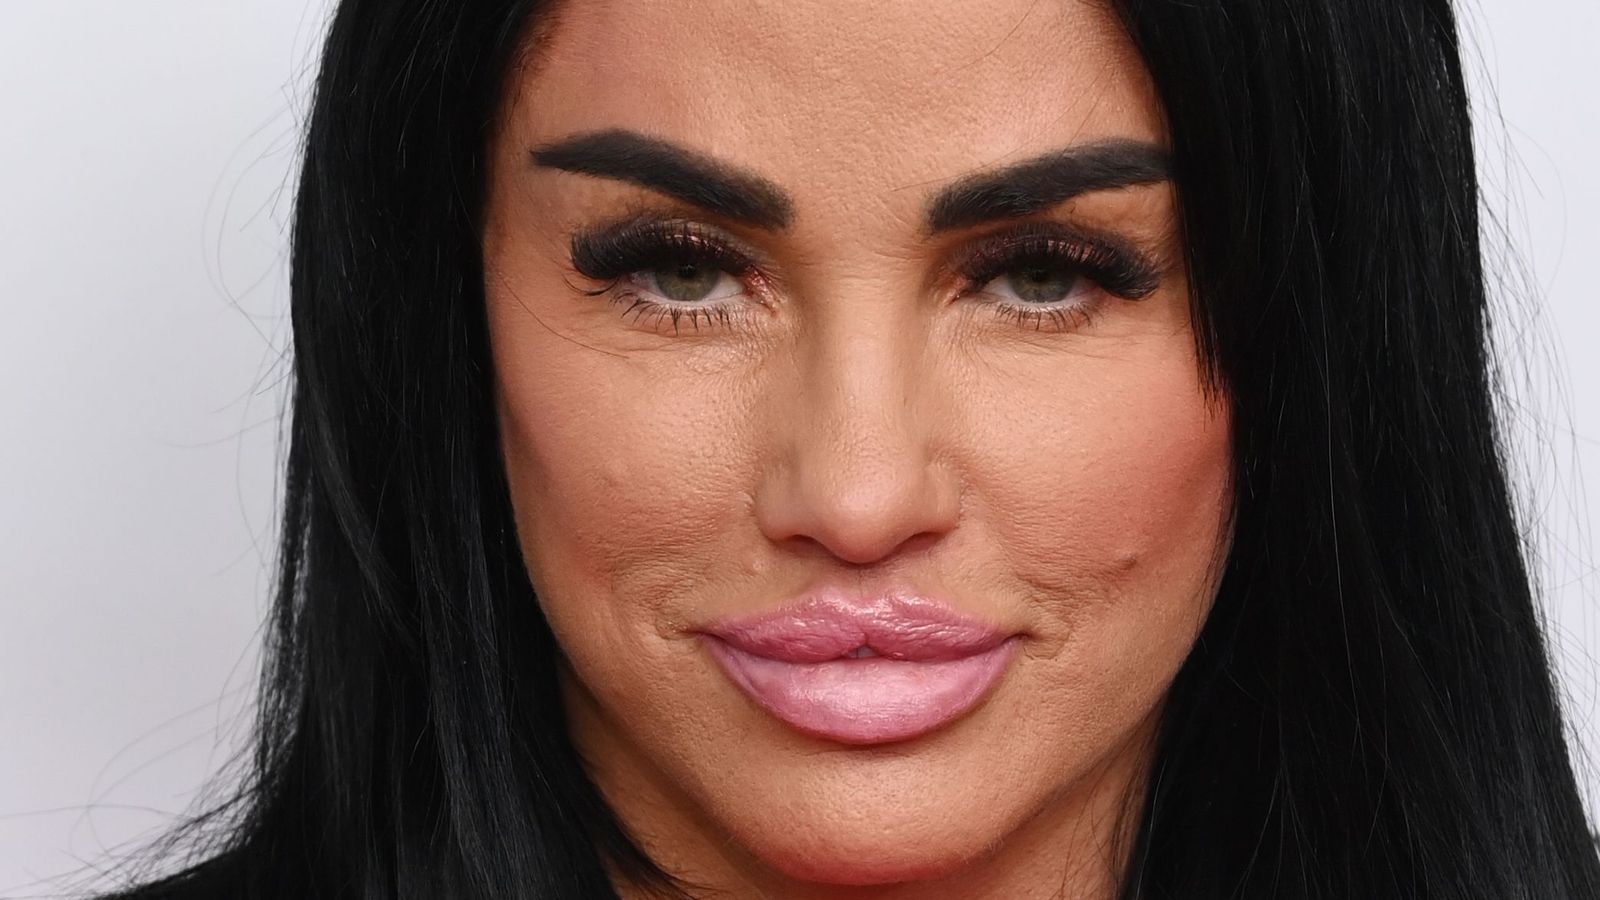 Katie Price: 'Nothing worse' than young women having cosmetic procedures like fillers and boob jobs